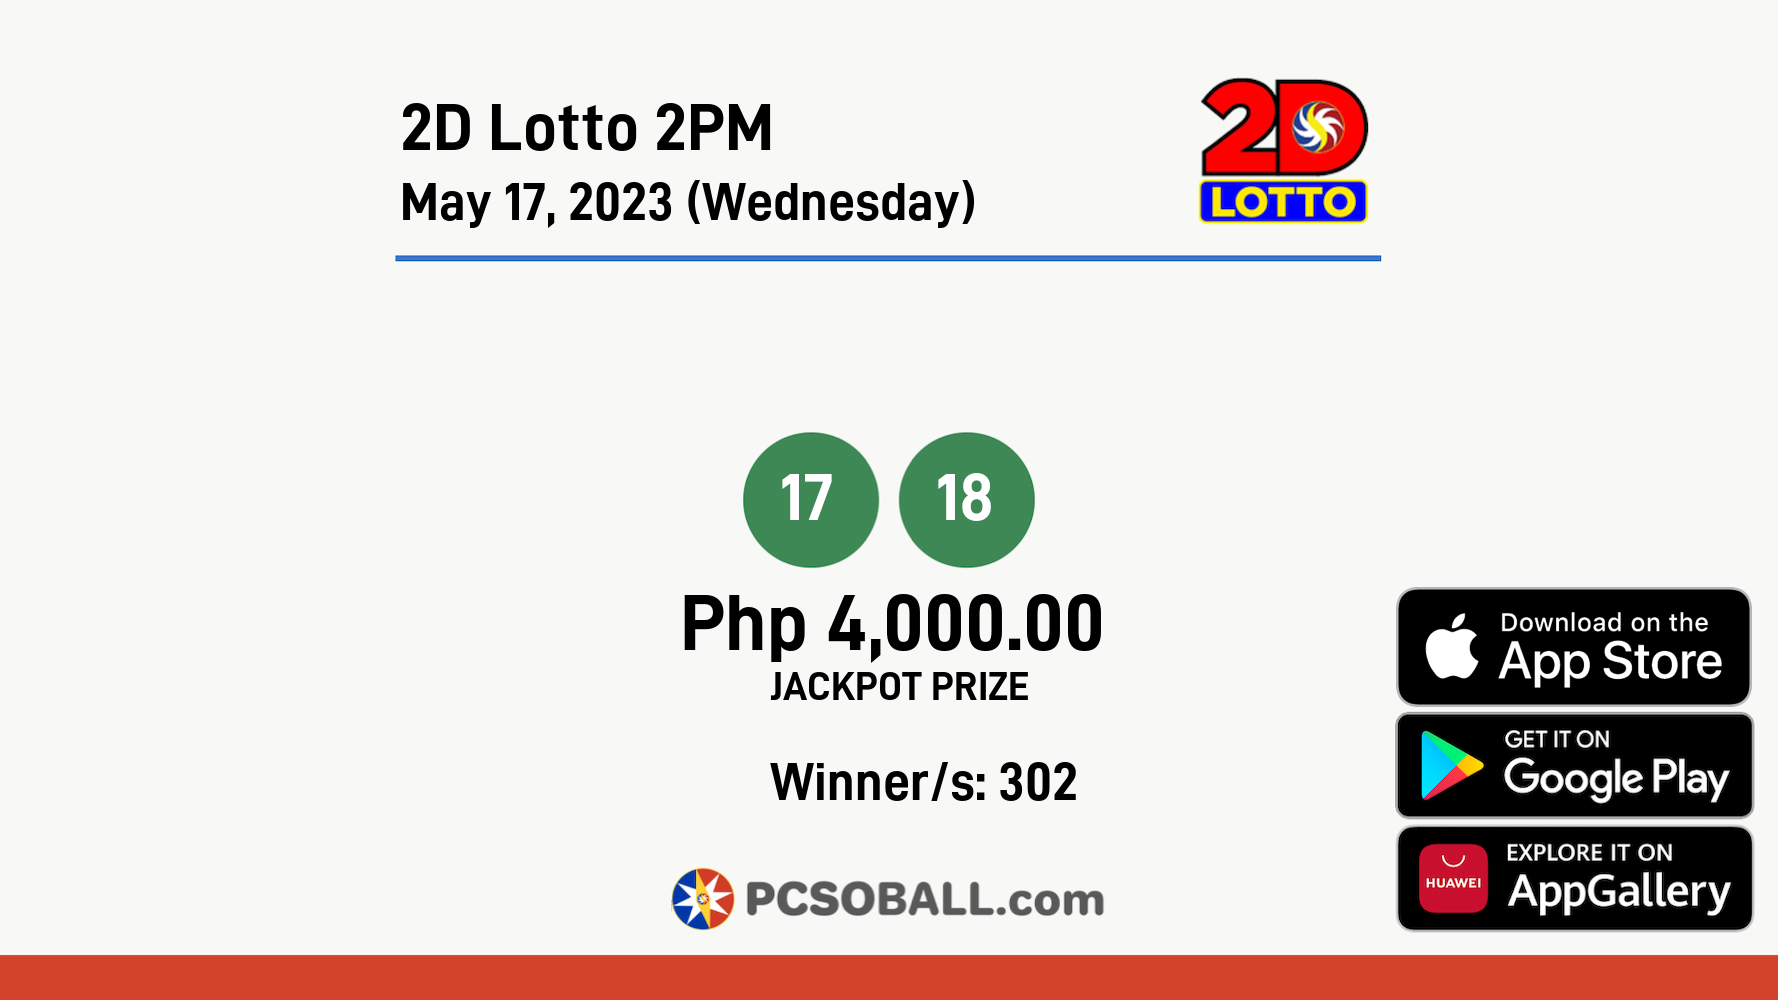 2D Lotto 2PM May 17, 2023 (Wednesday) Result